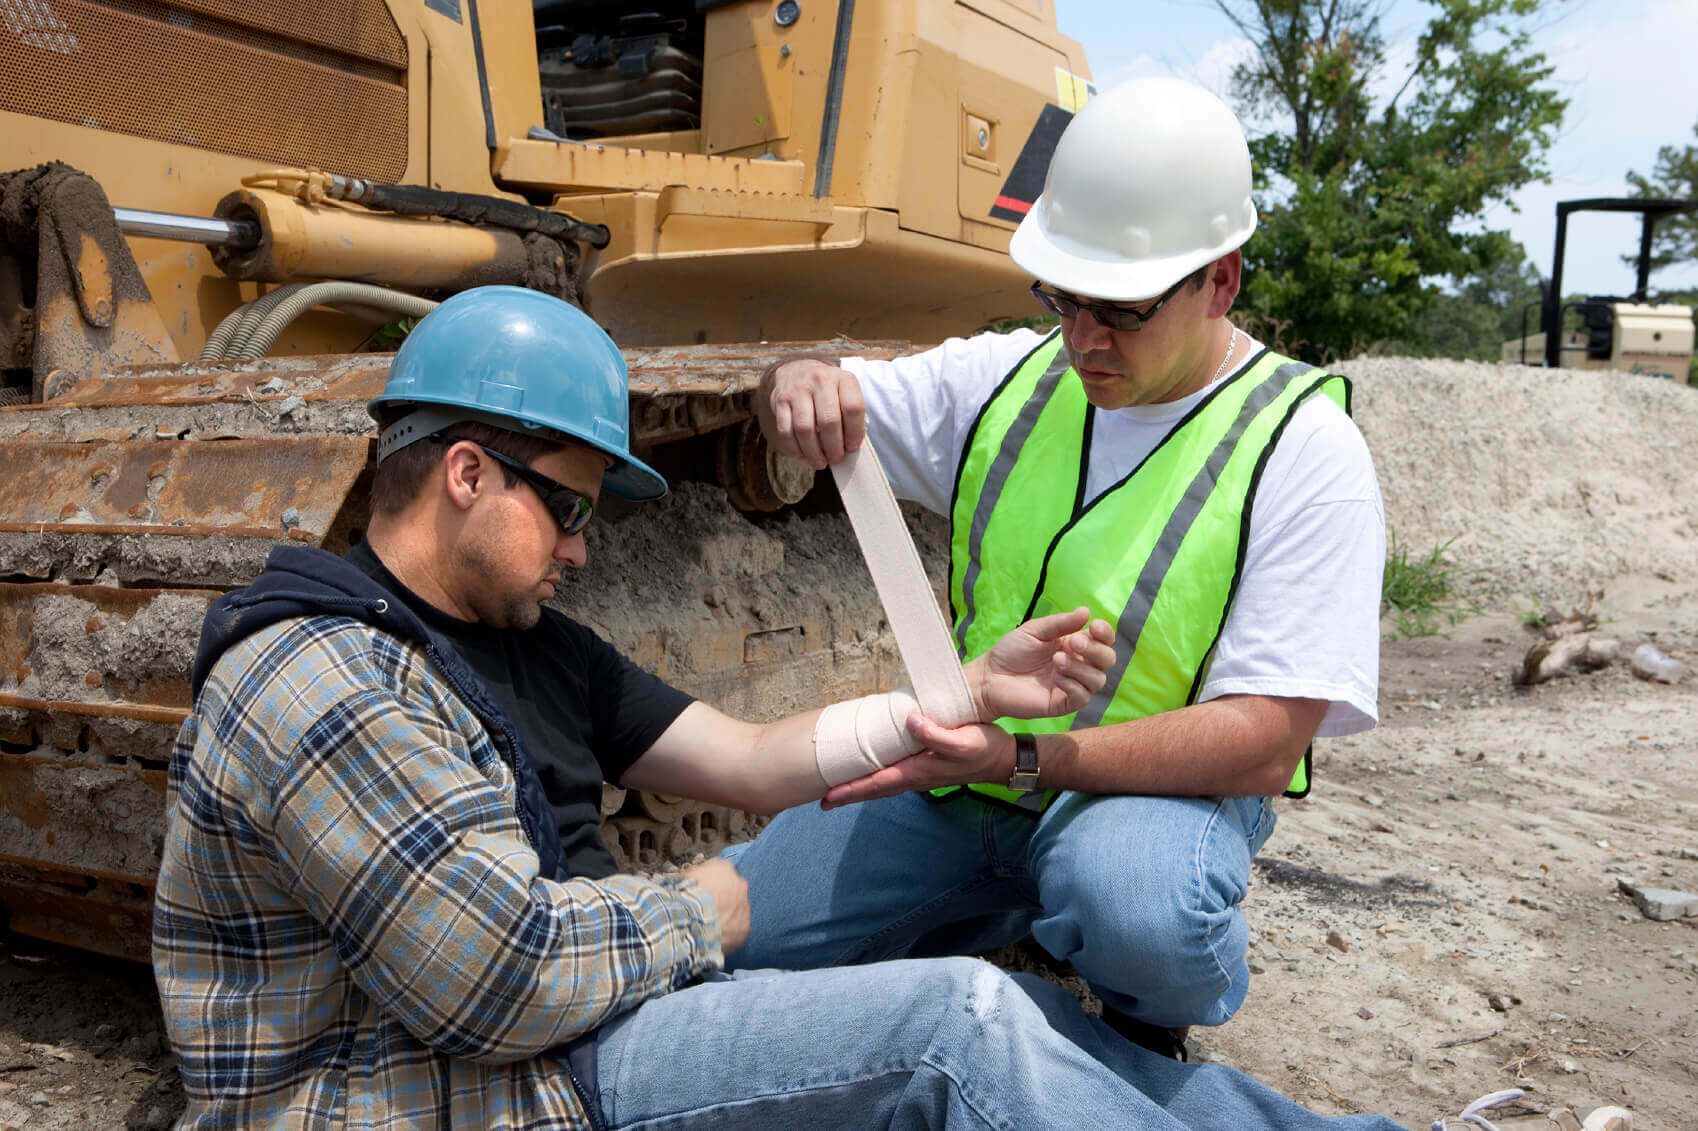 construction foreman applying first aid to injured construction worker